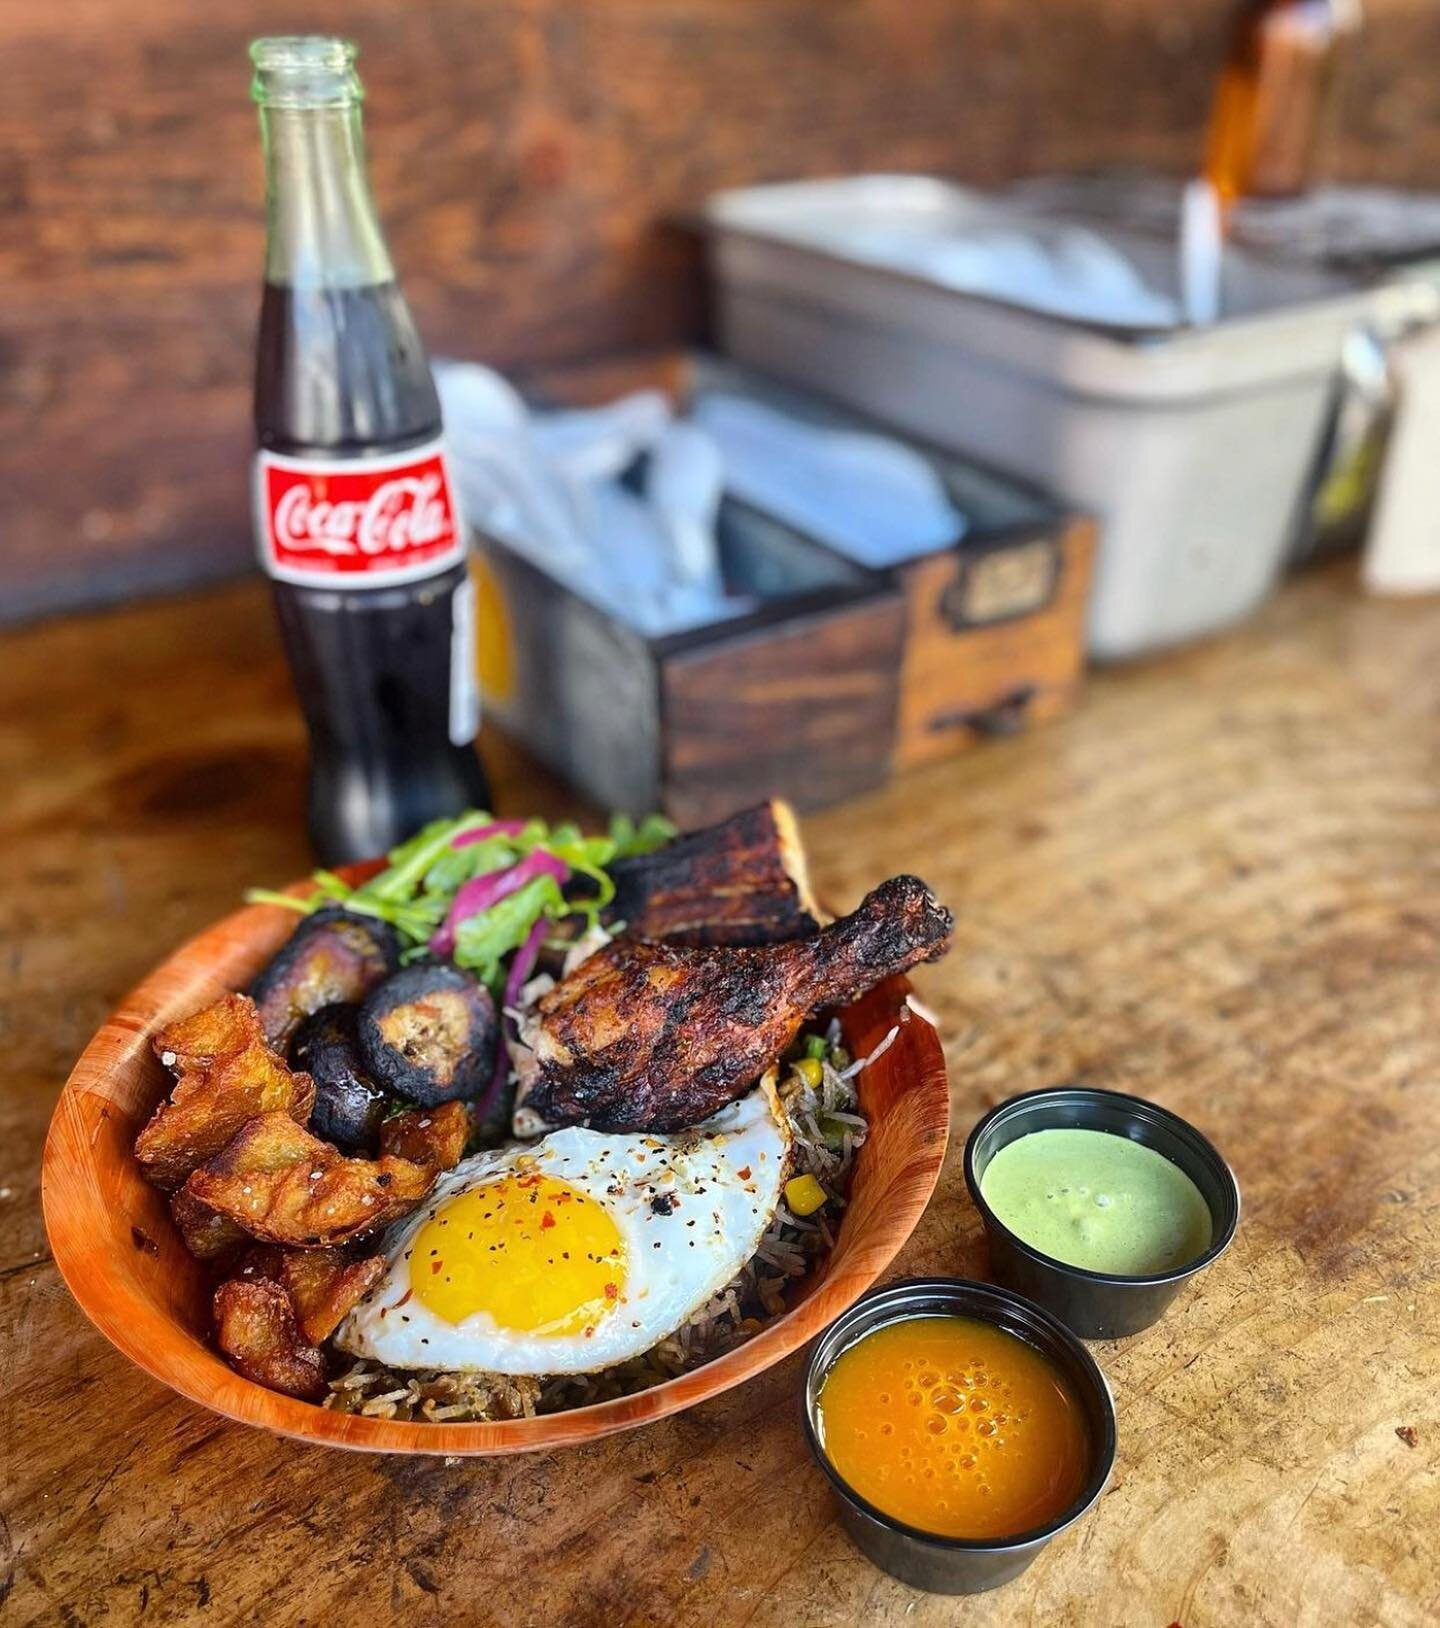 Tacu Tacu! Our favorite breakfast at @chickenandguns . Open winter hours 11am until 10pm Sunday though Thursday. 11am until midnight on the weekend! 🔥👹🔥